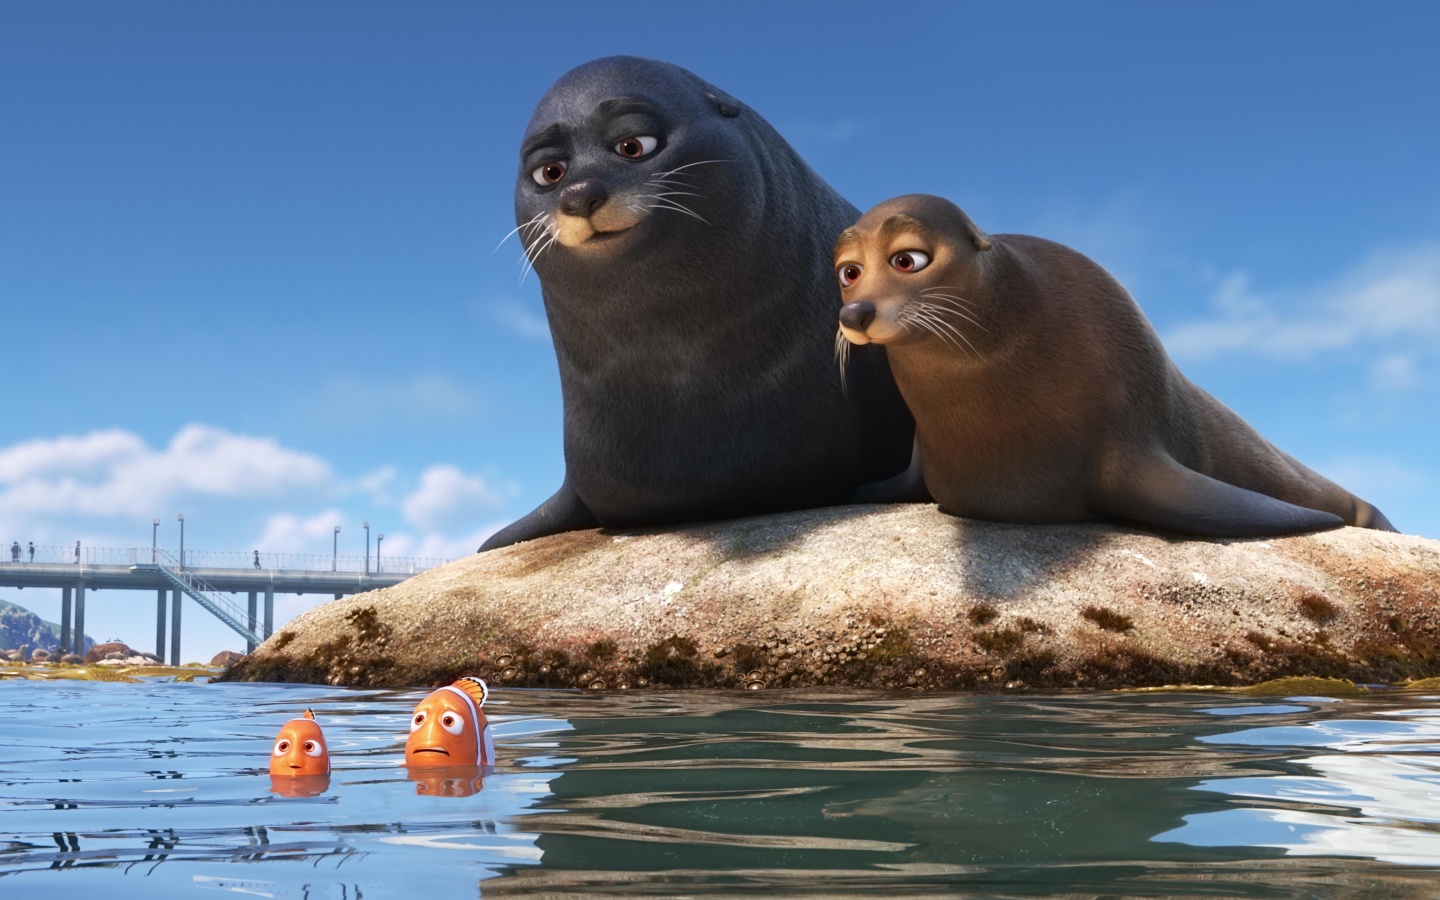 Finding Dory with Fish and Seal screenshot #1 1440x900